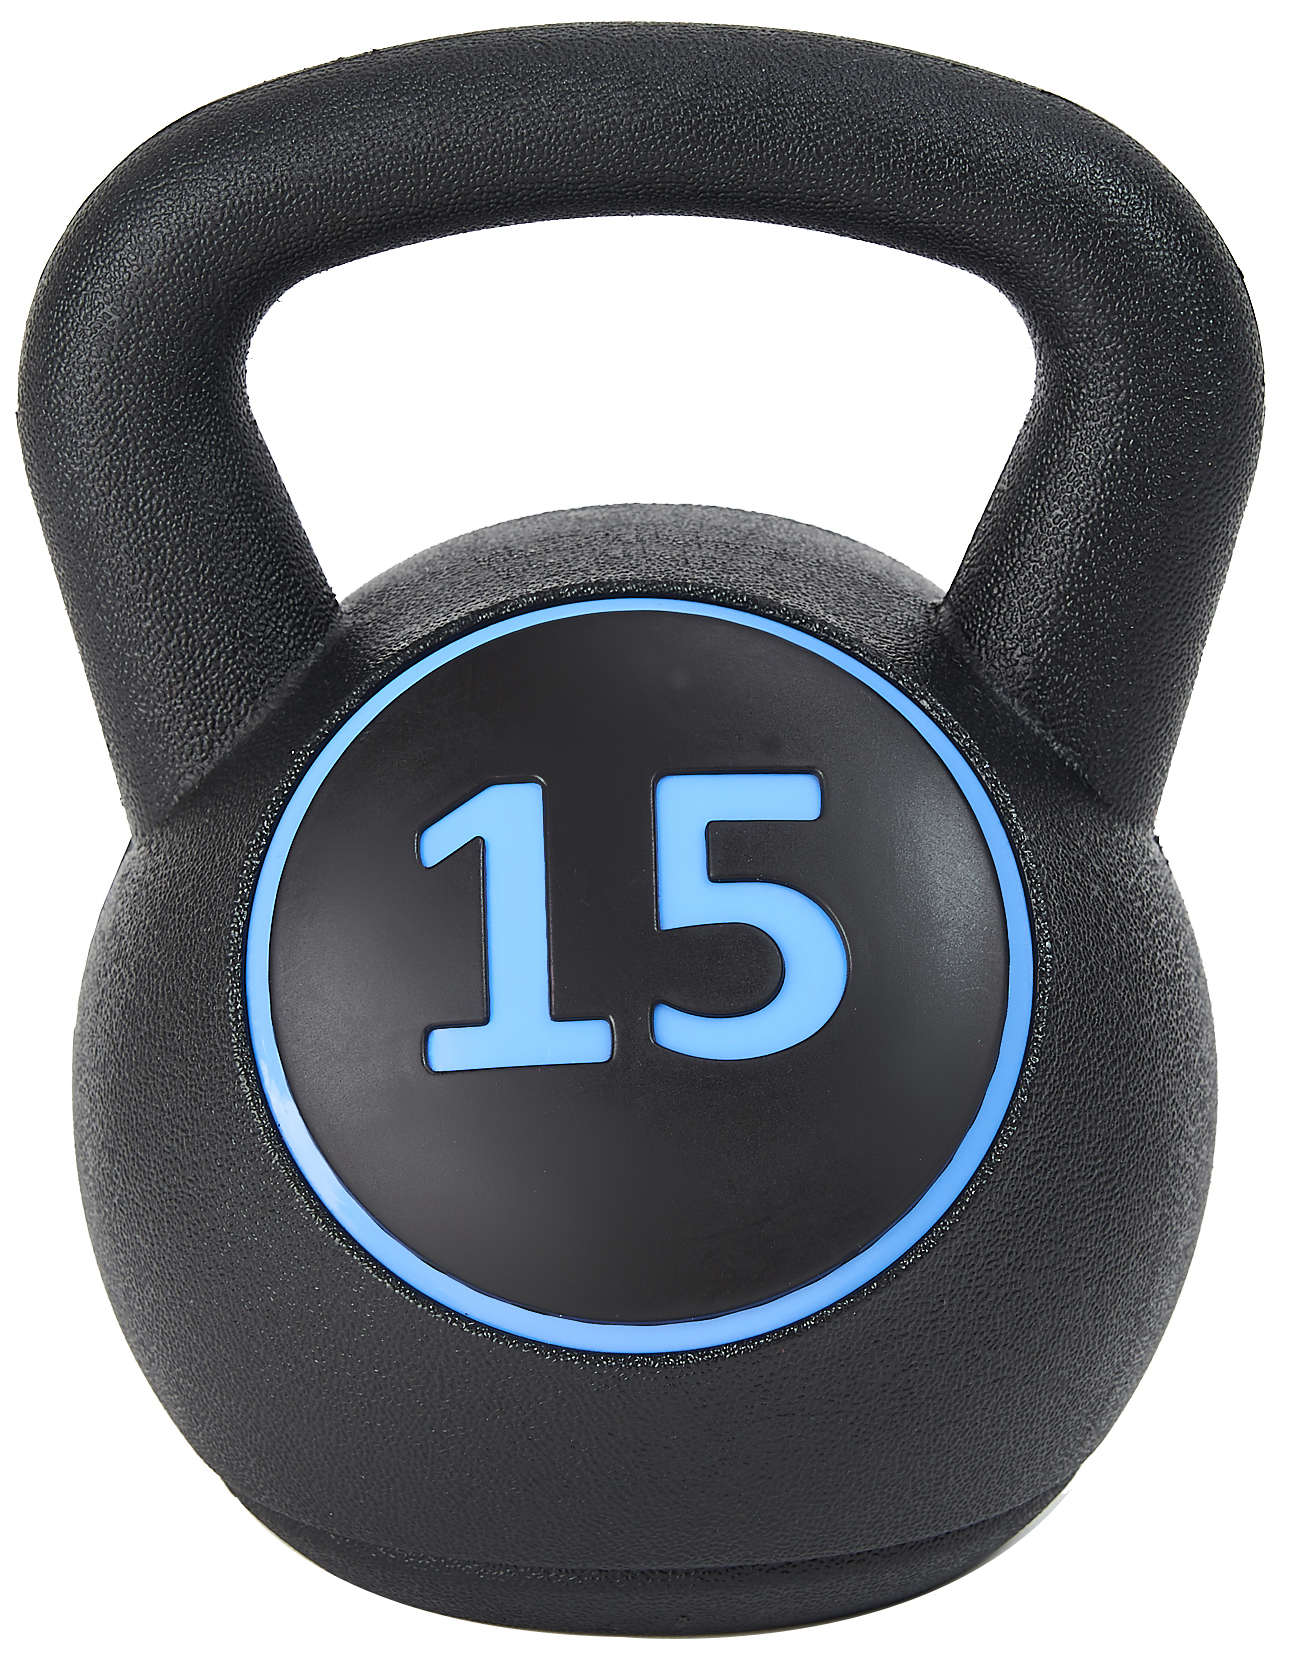 BalanceFrom Wide Grip Kettlebell Exercise Fitness Weight Set, 3-Pieces: 5lb, 10lb, and 15lb Kettlebells - image 2 of 6